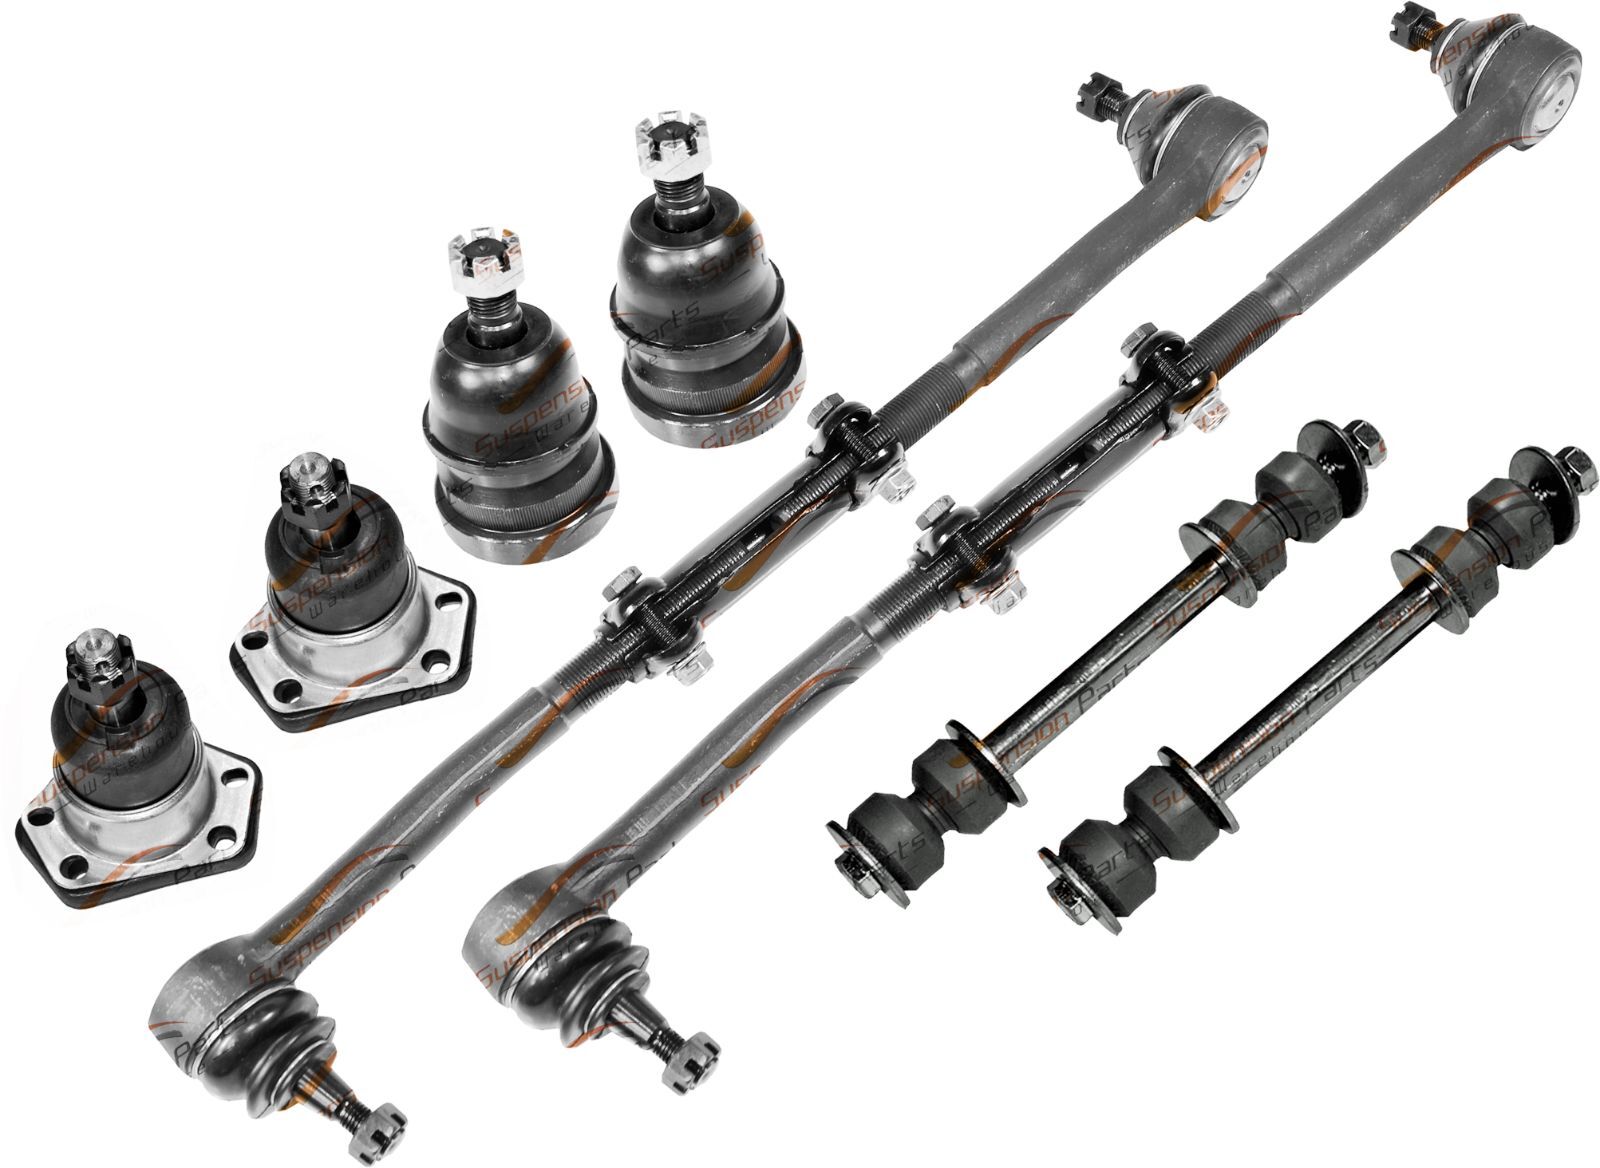 New Kit Ball Joints Tie Rods Sleeve Sway Bar For Gmc Safari Cadillac Deville